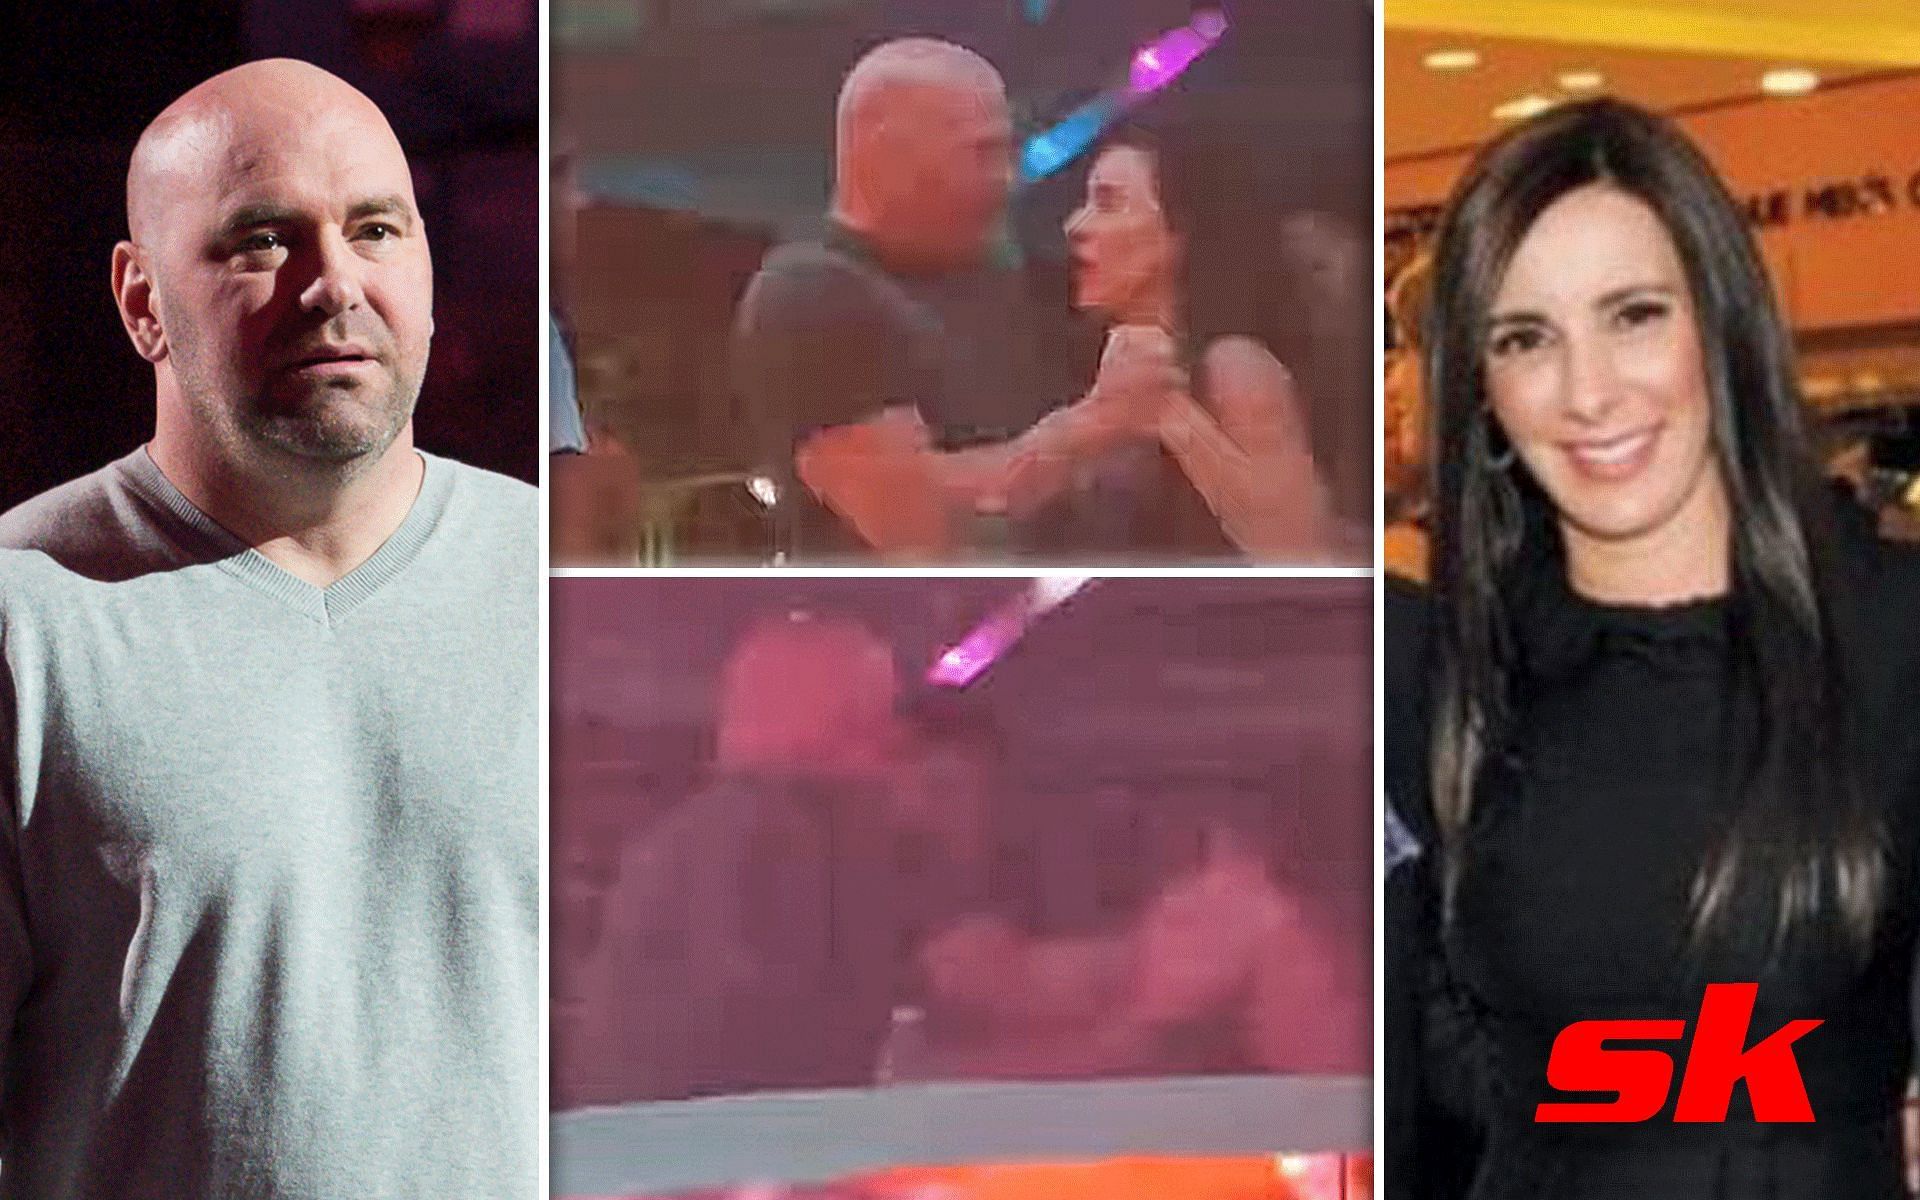 Dana Whites Wife Releases Statement On His Out Of Character Slapping Incident 